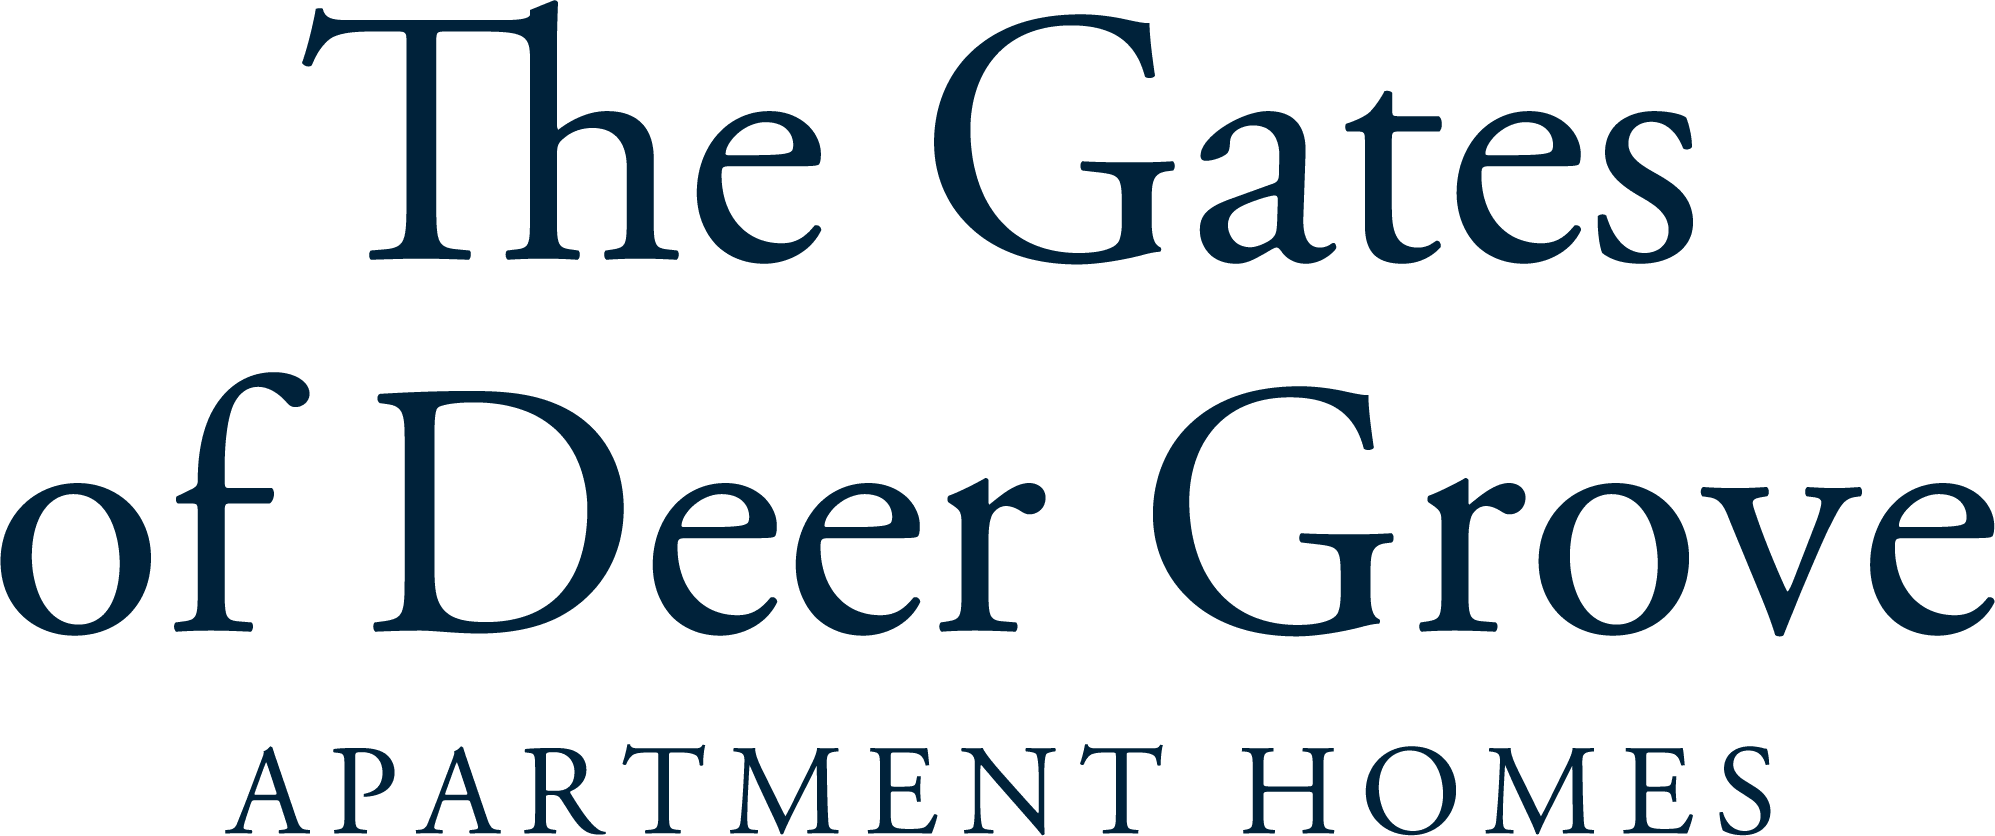 Logo for The Gates of Deer Grove Apartment Homes